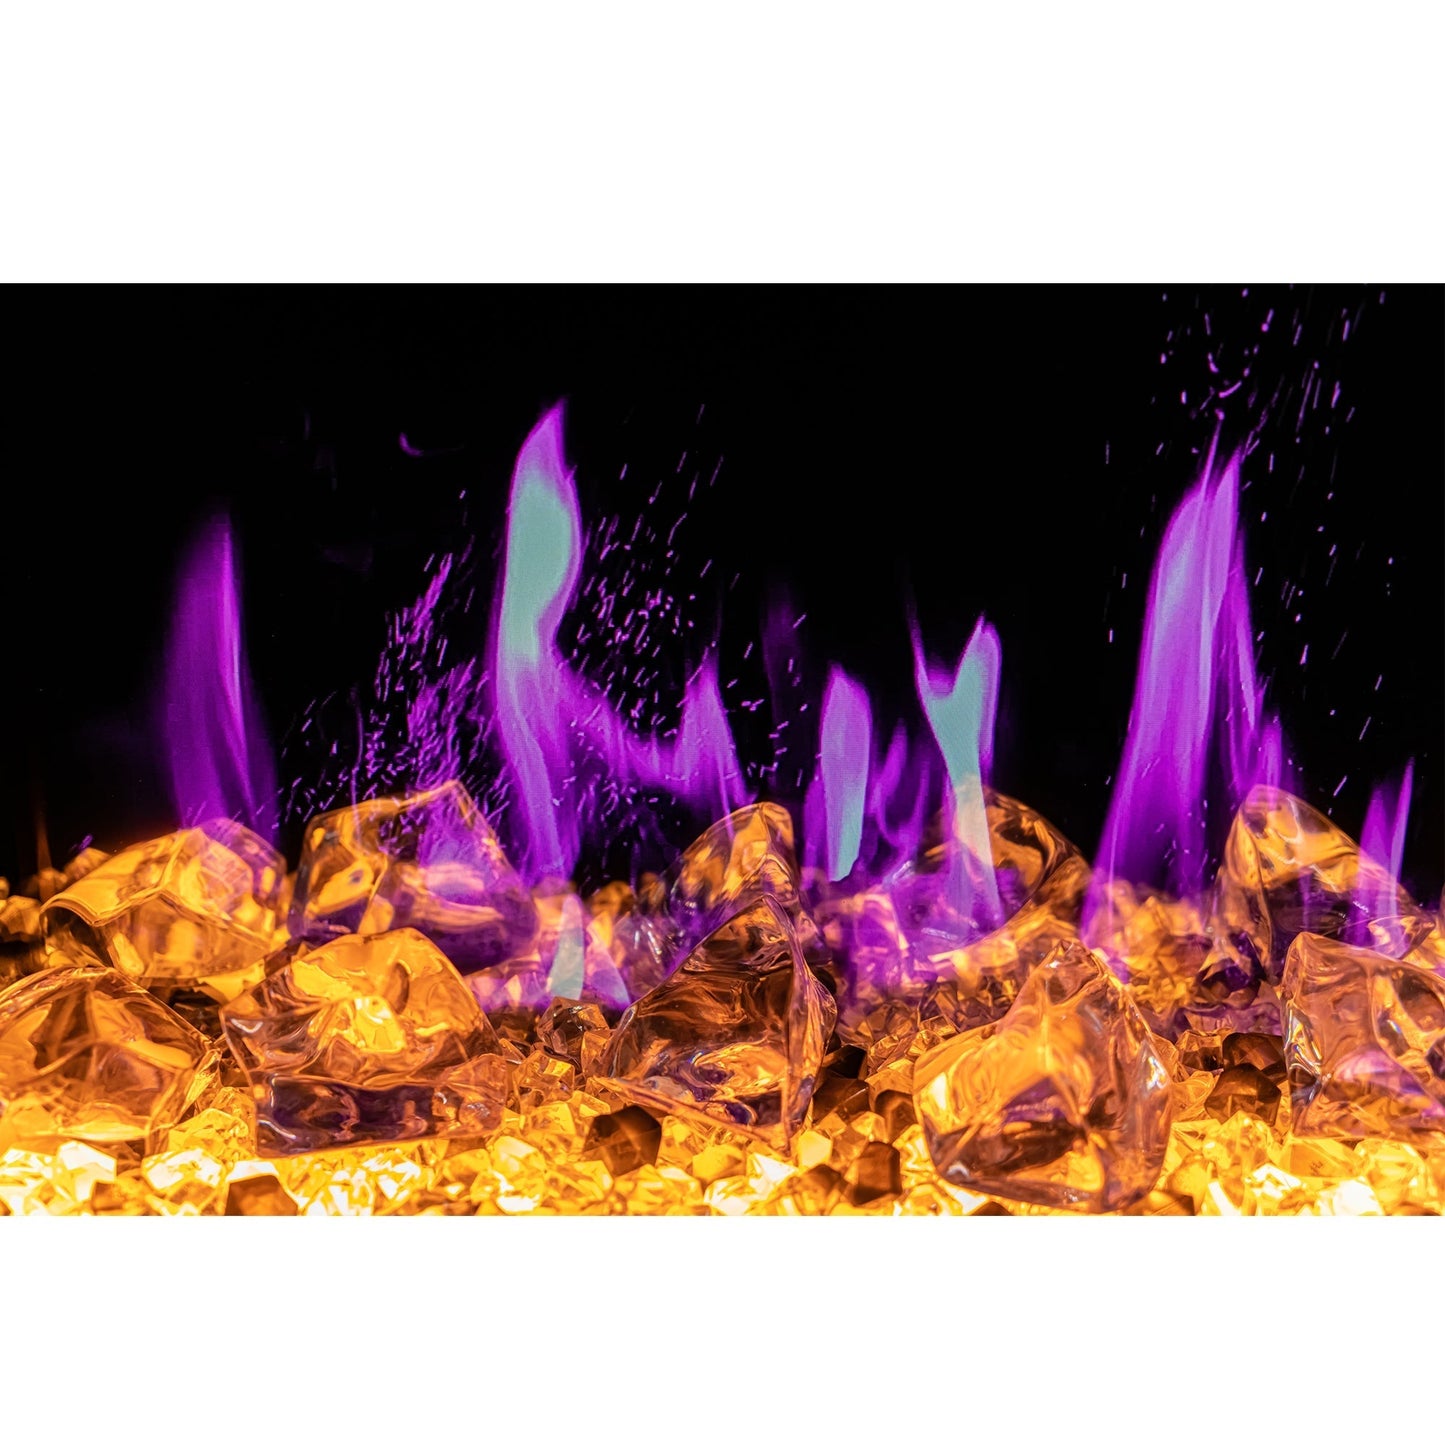 Zopaflame Crystals Decor Media Kit for 75-78 inch fireplace